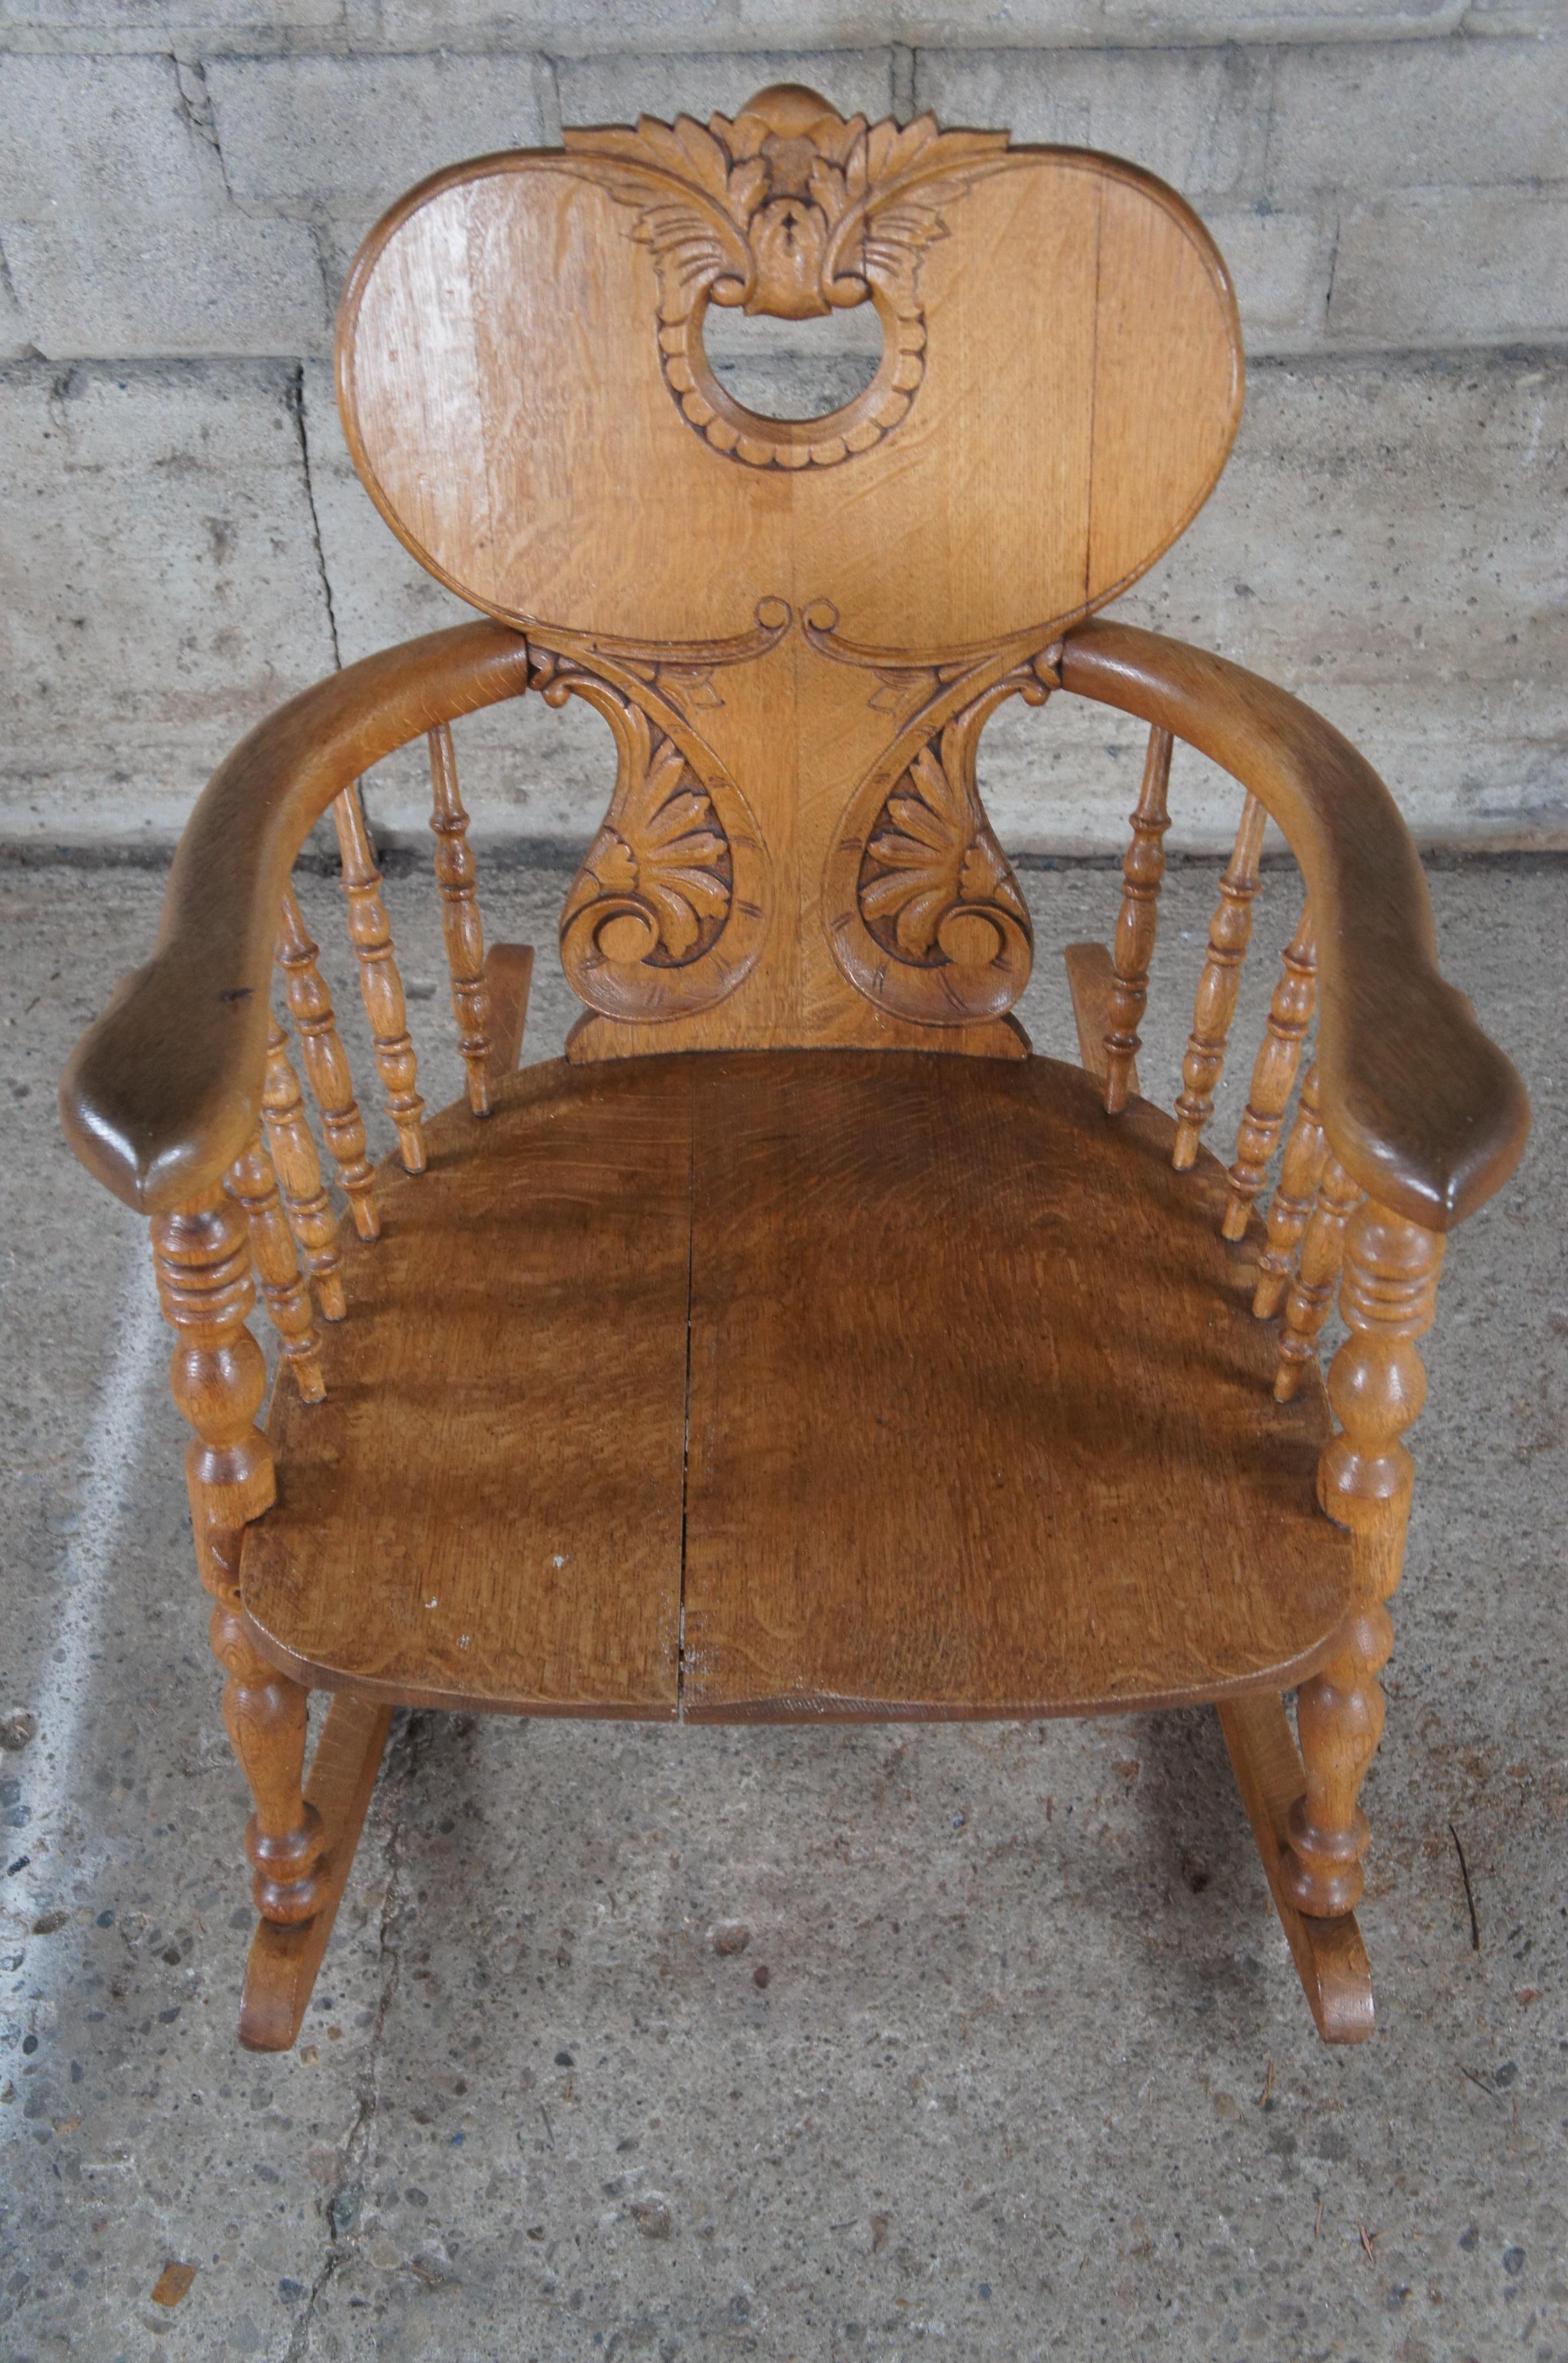 Antique Late Victorian Carved Quartersawn Oak Barrel Back Rocking Chair Rocker In Good Condition For Sale In Dayton, OH